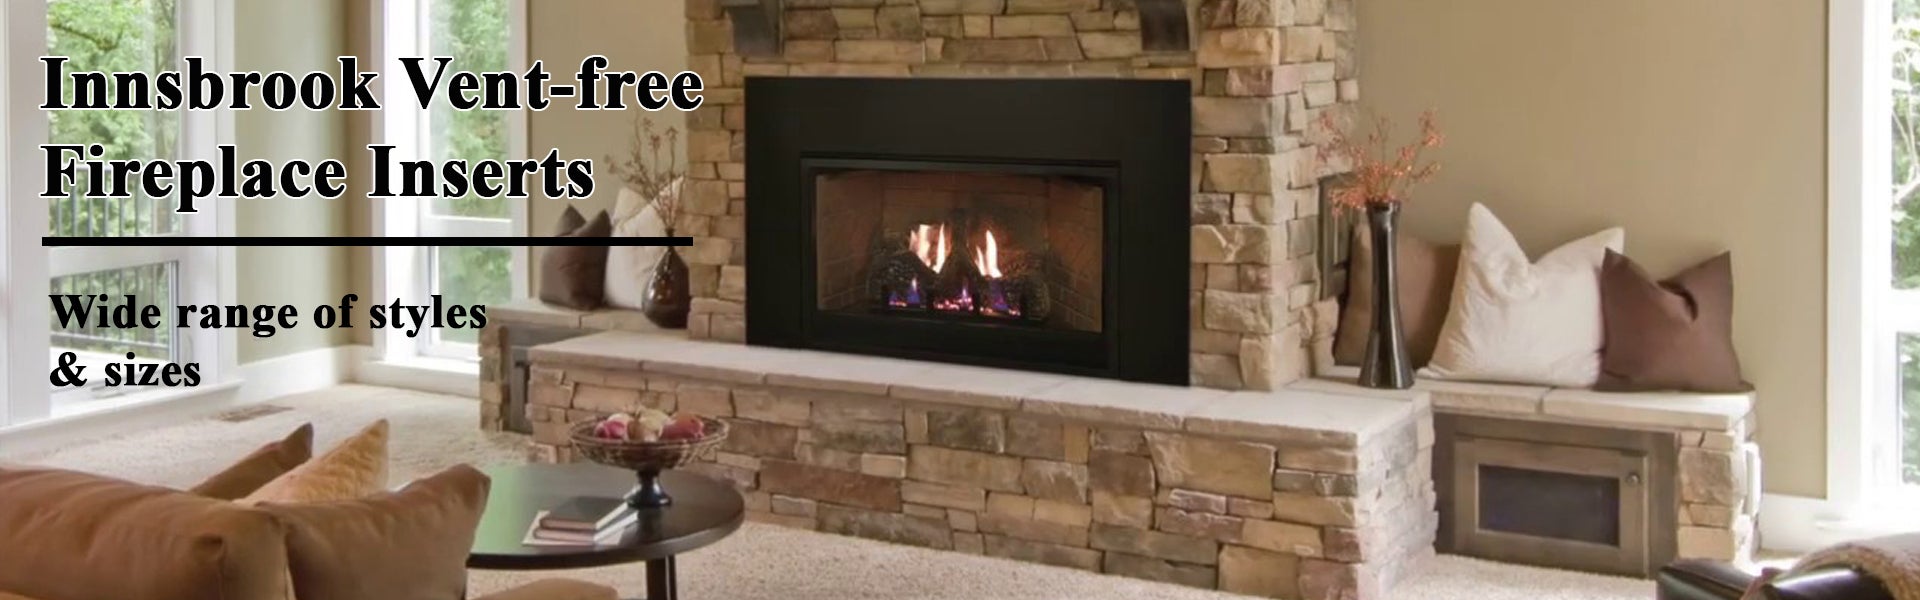 vent free fireplace inserts